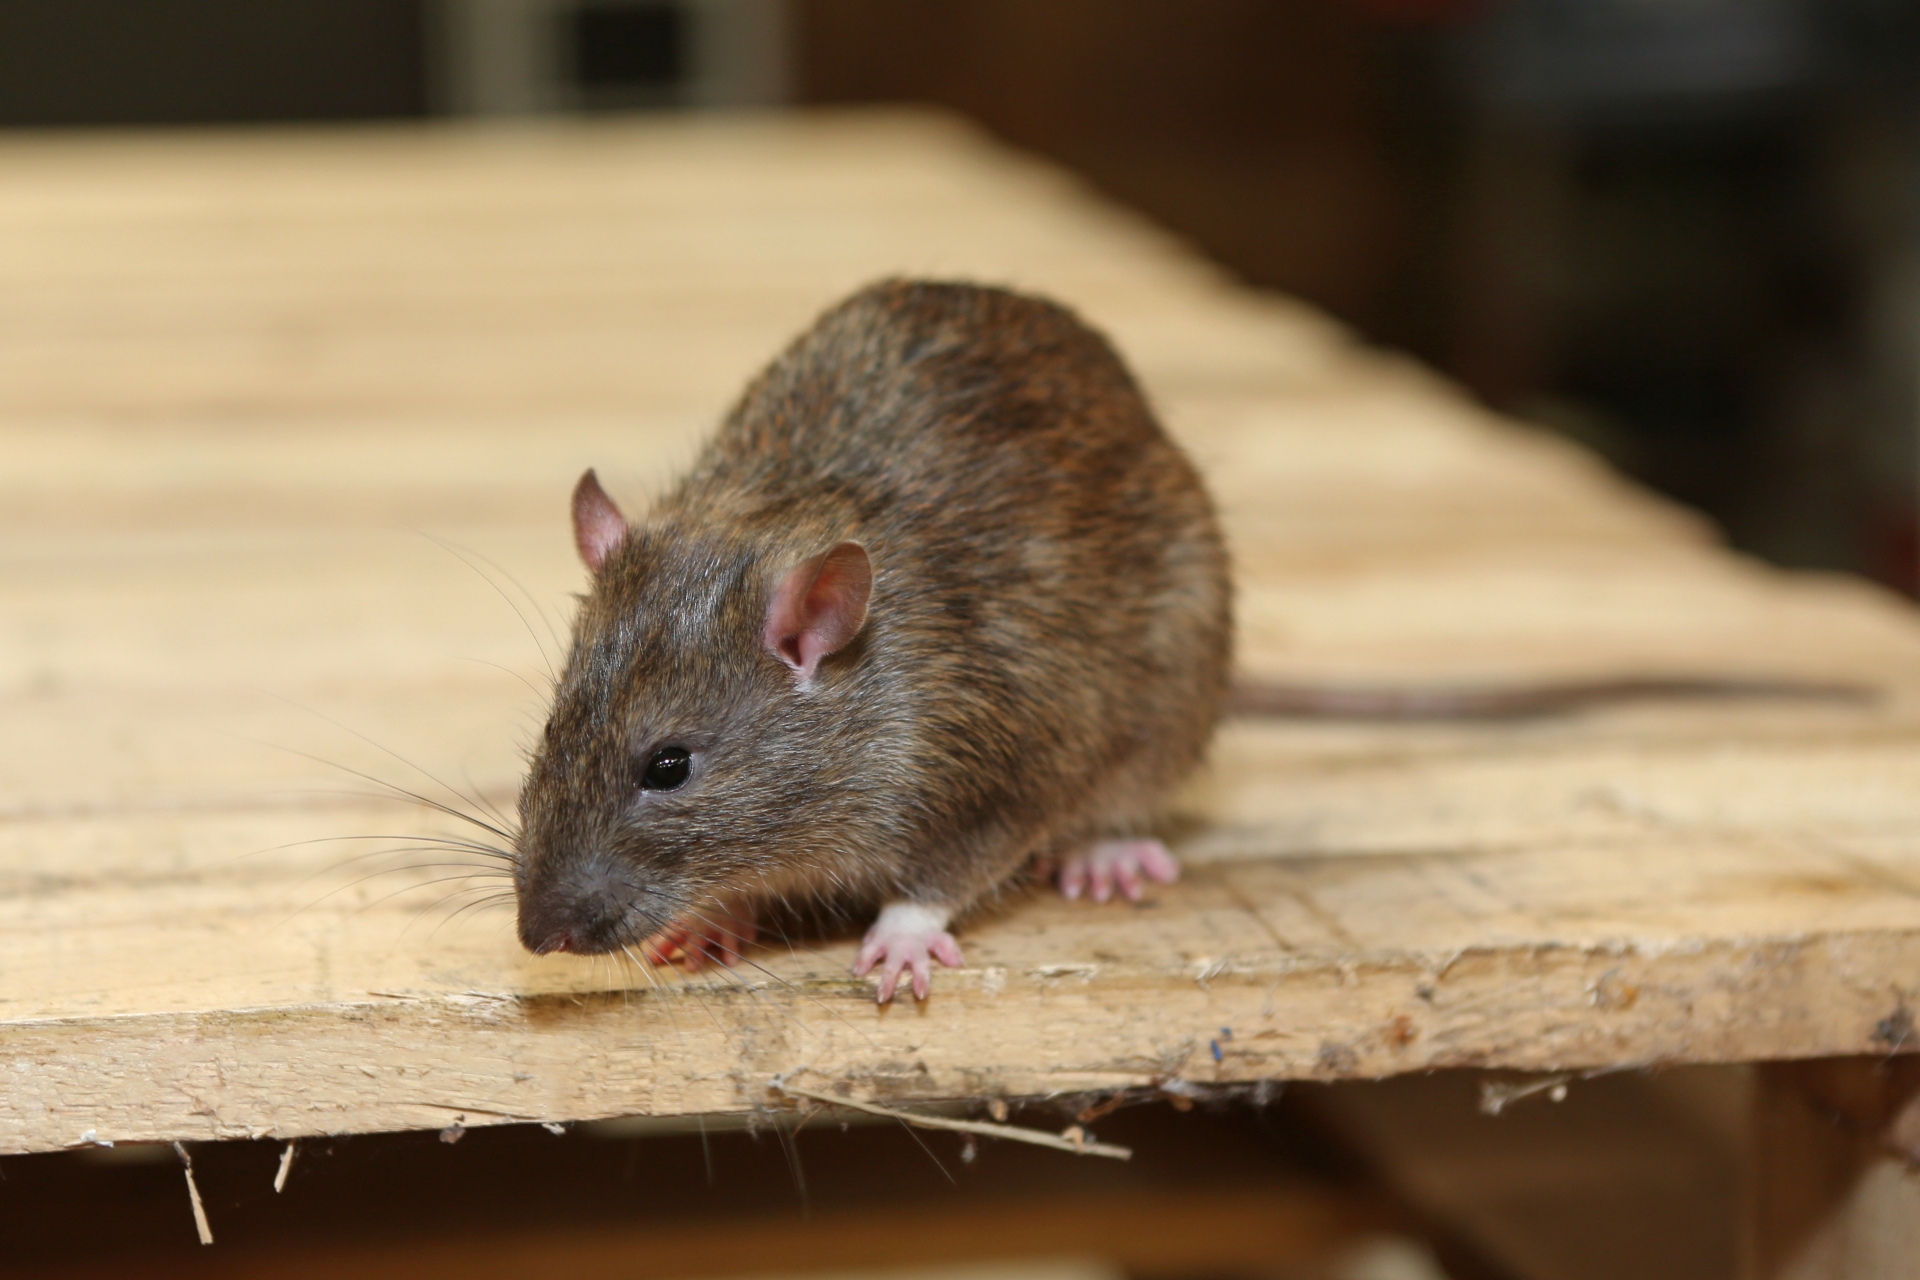 Rat Infestation, Pest Control in Stratford, West Ham, E15. Call Now 020 8166 9746